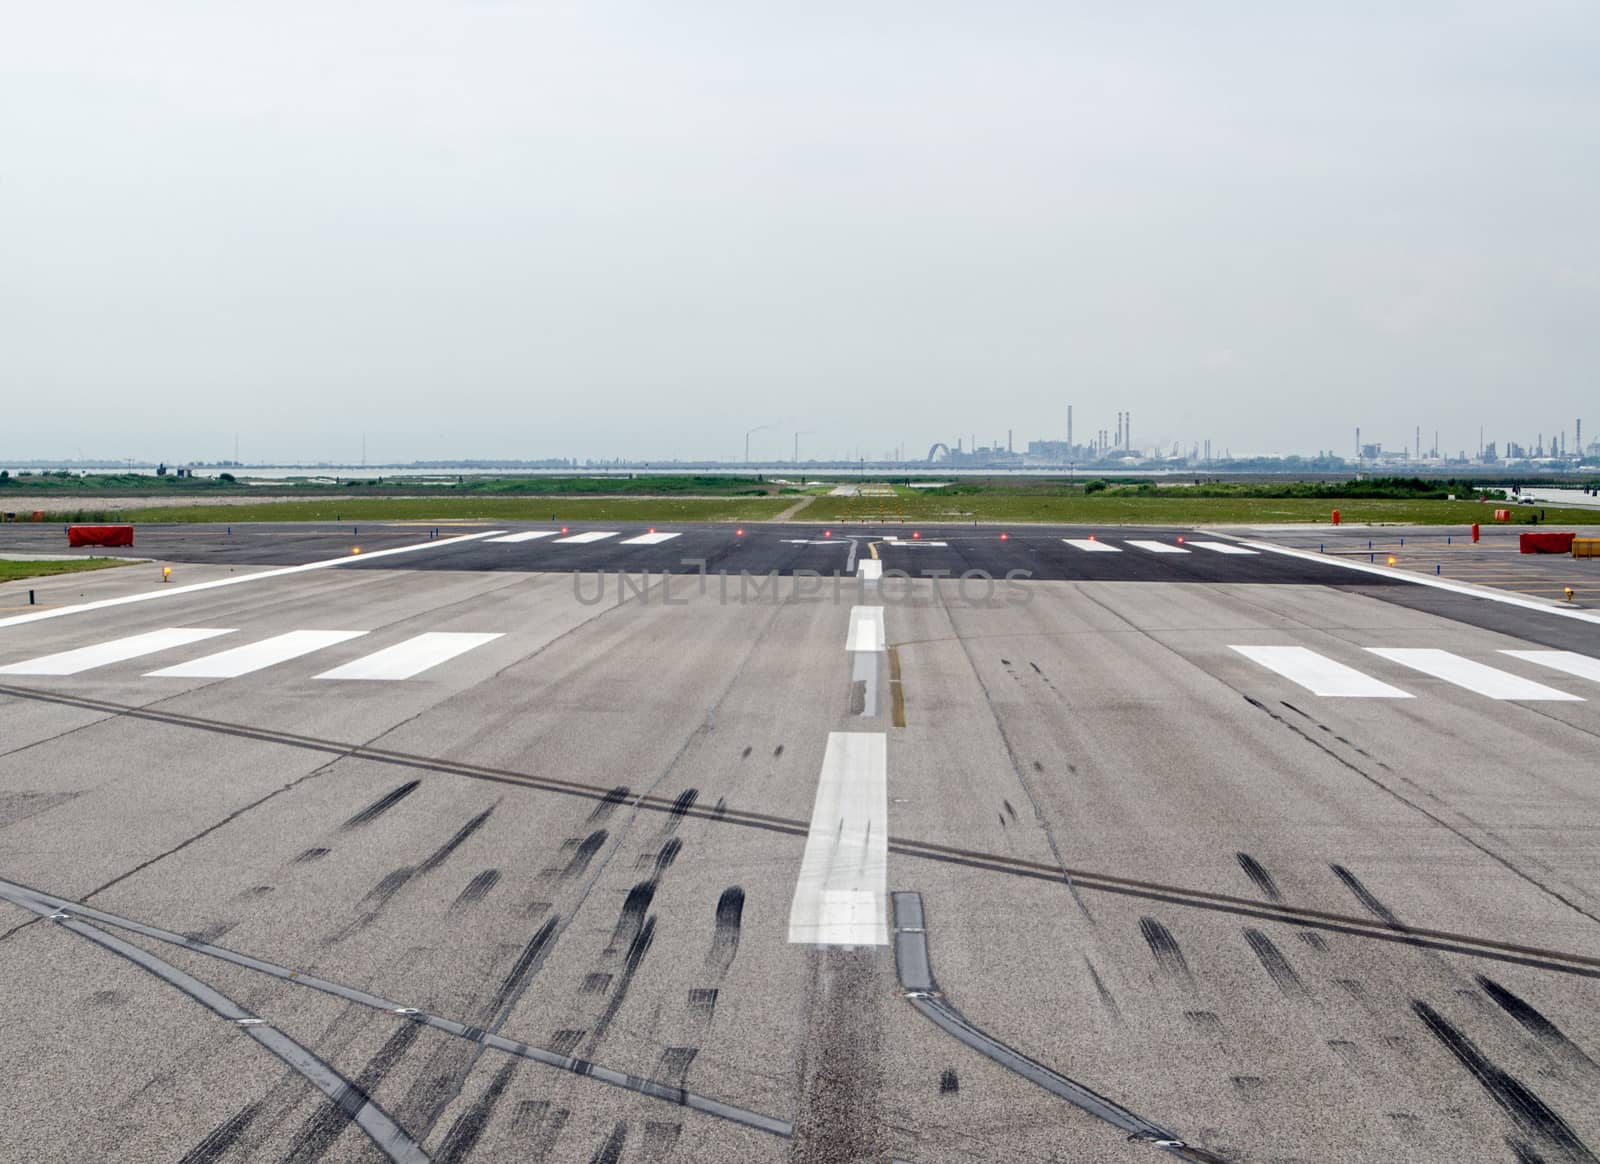 End of the runway, with skid marks from landings at Marco Polo Airport, Venice, Italy.